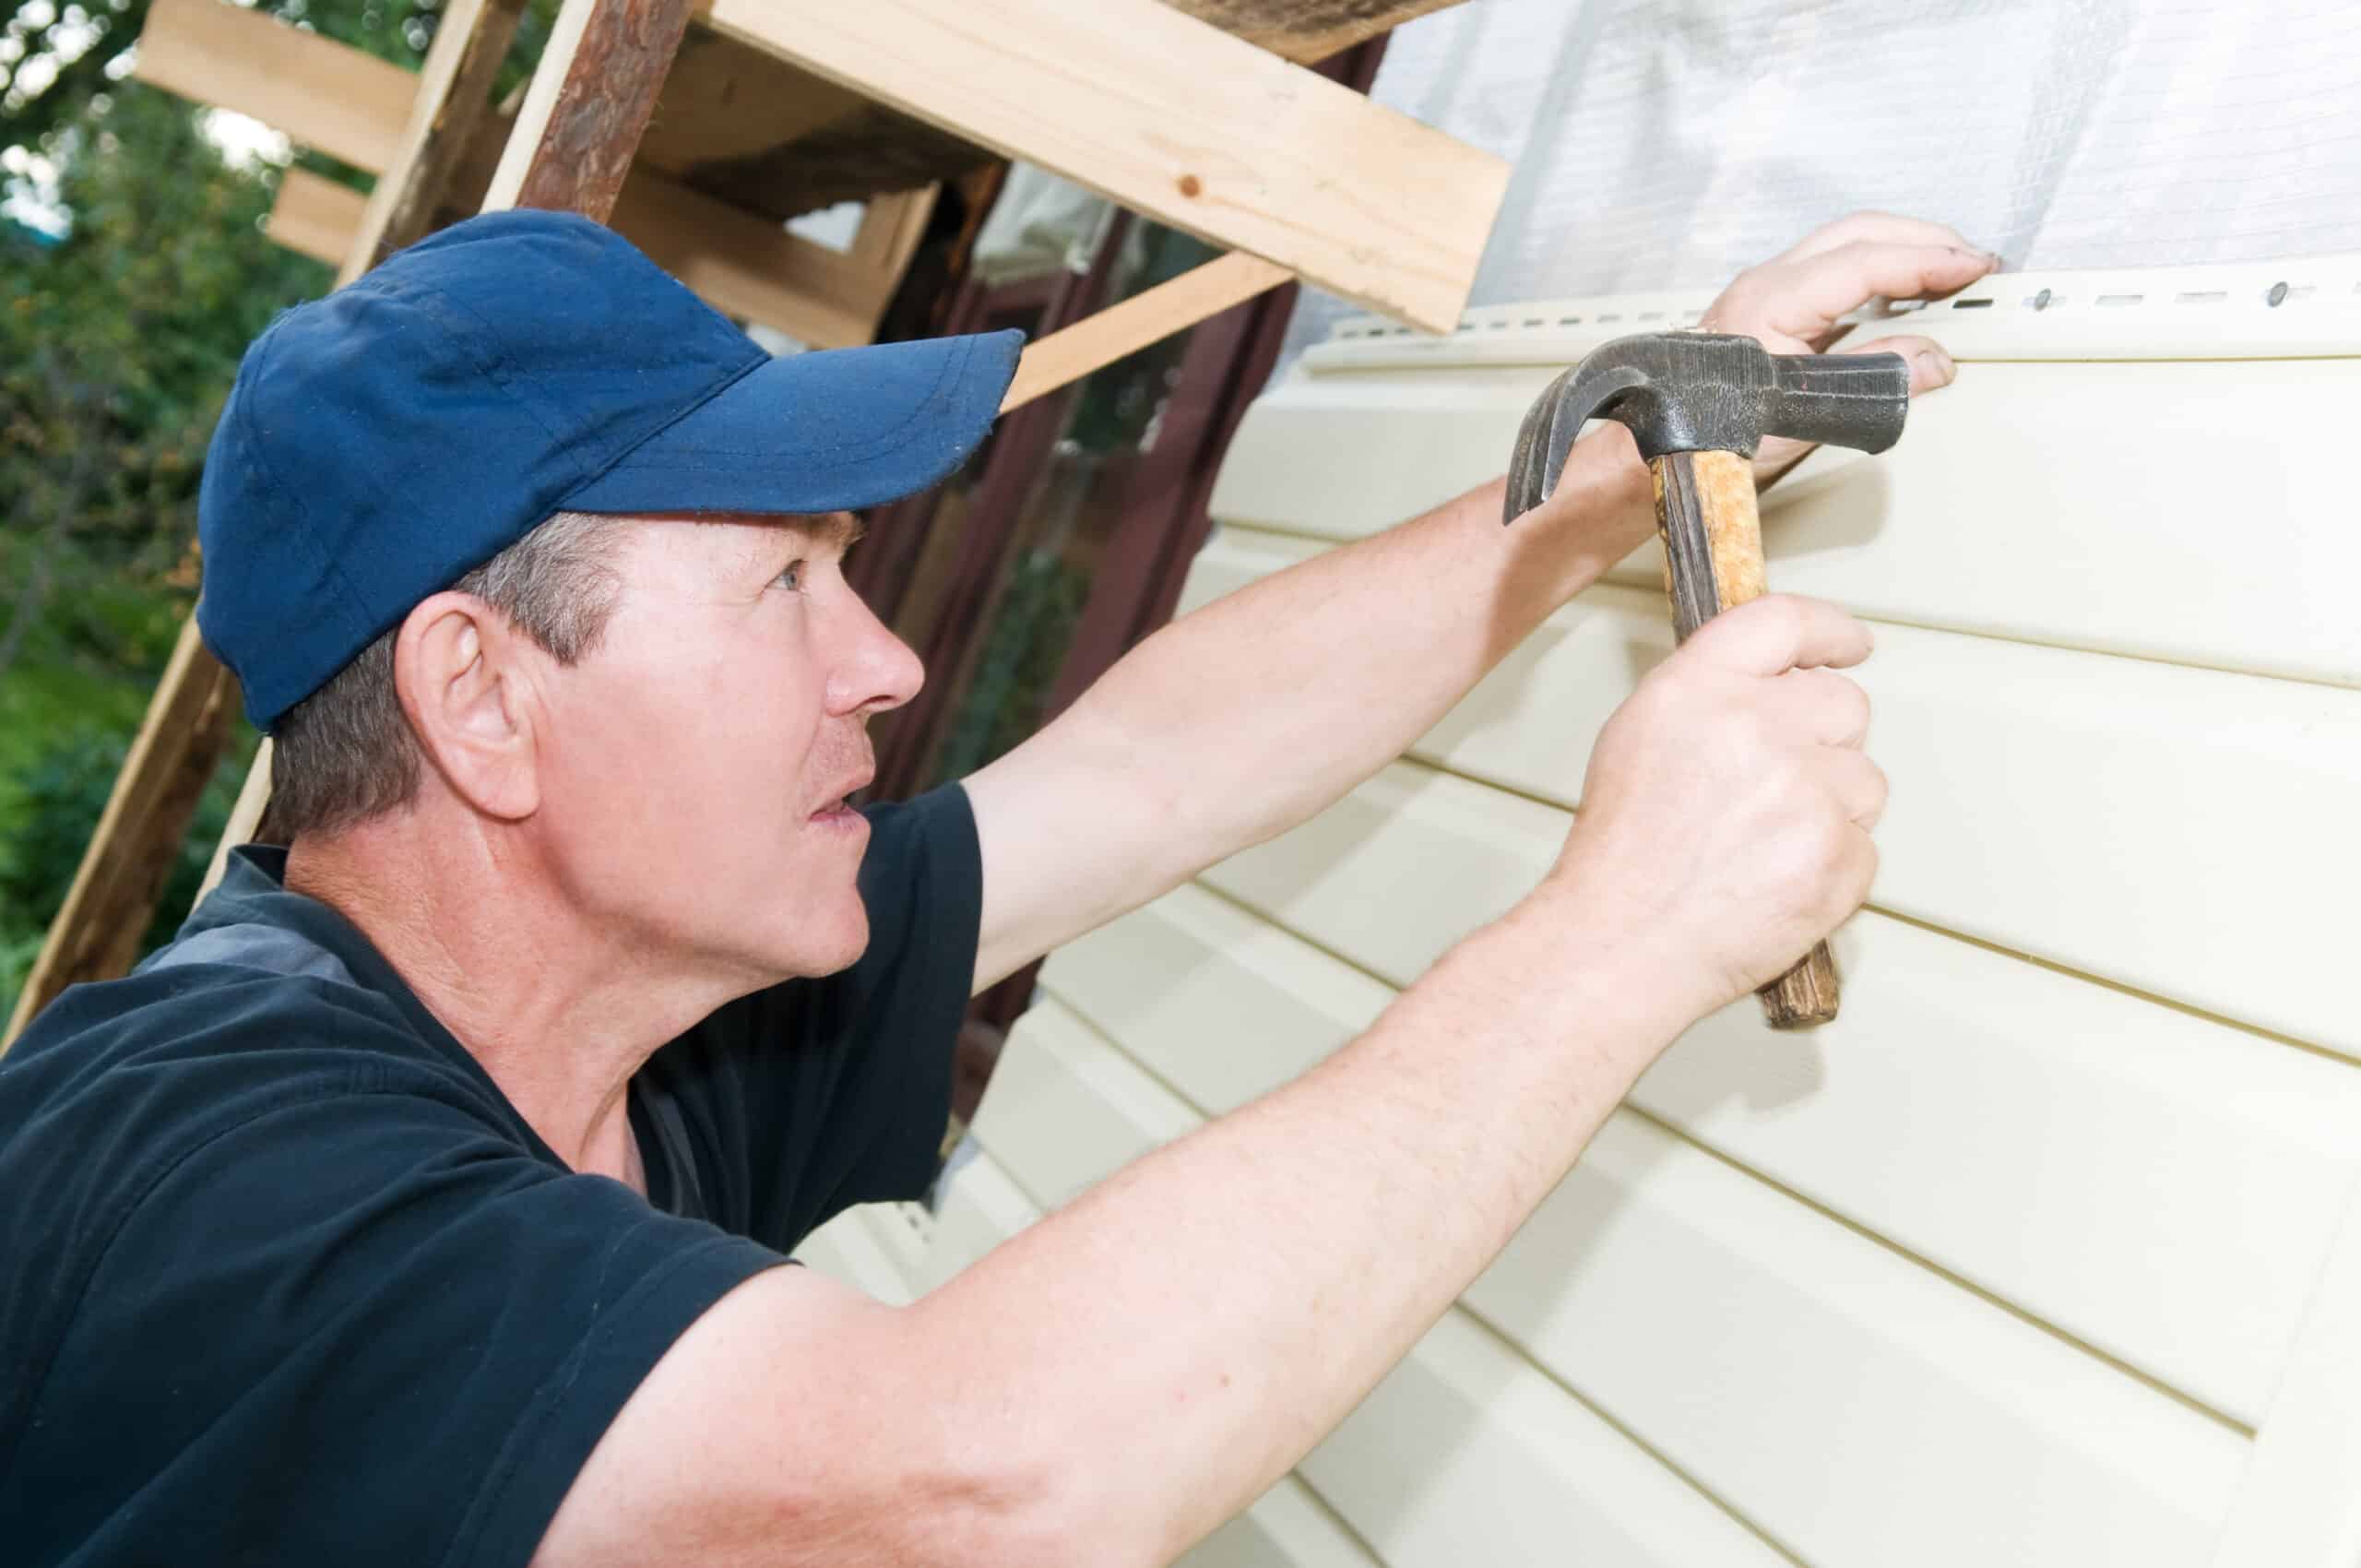 A gutter and siding contractor installs new house siding with a hammer. That's how you dominate the competition in your market.